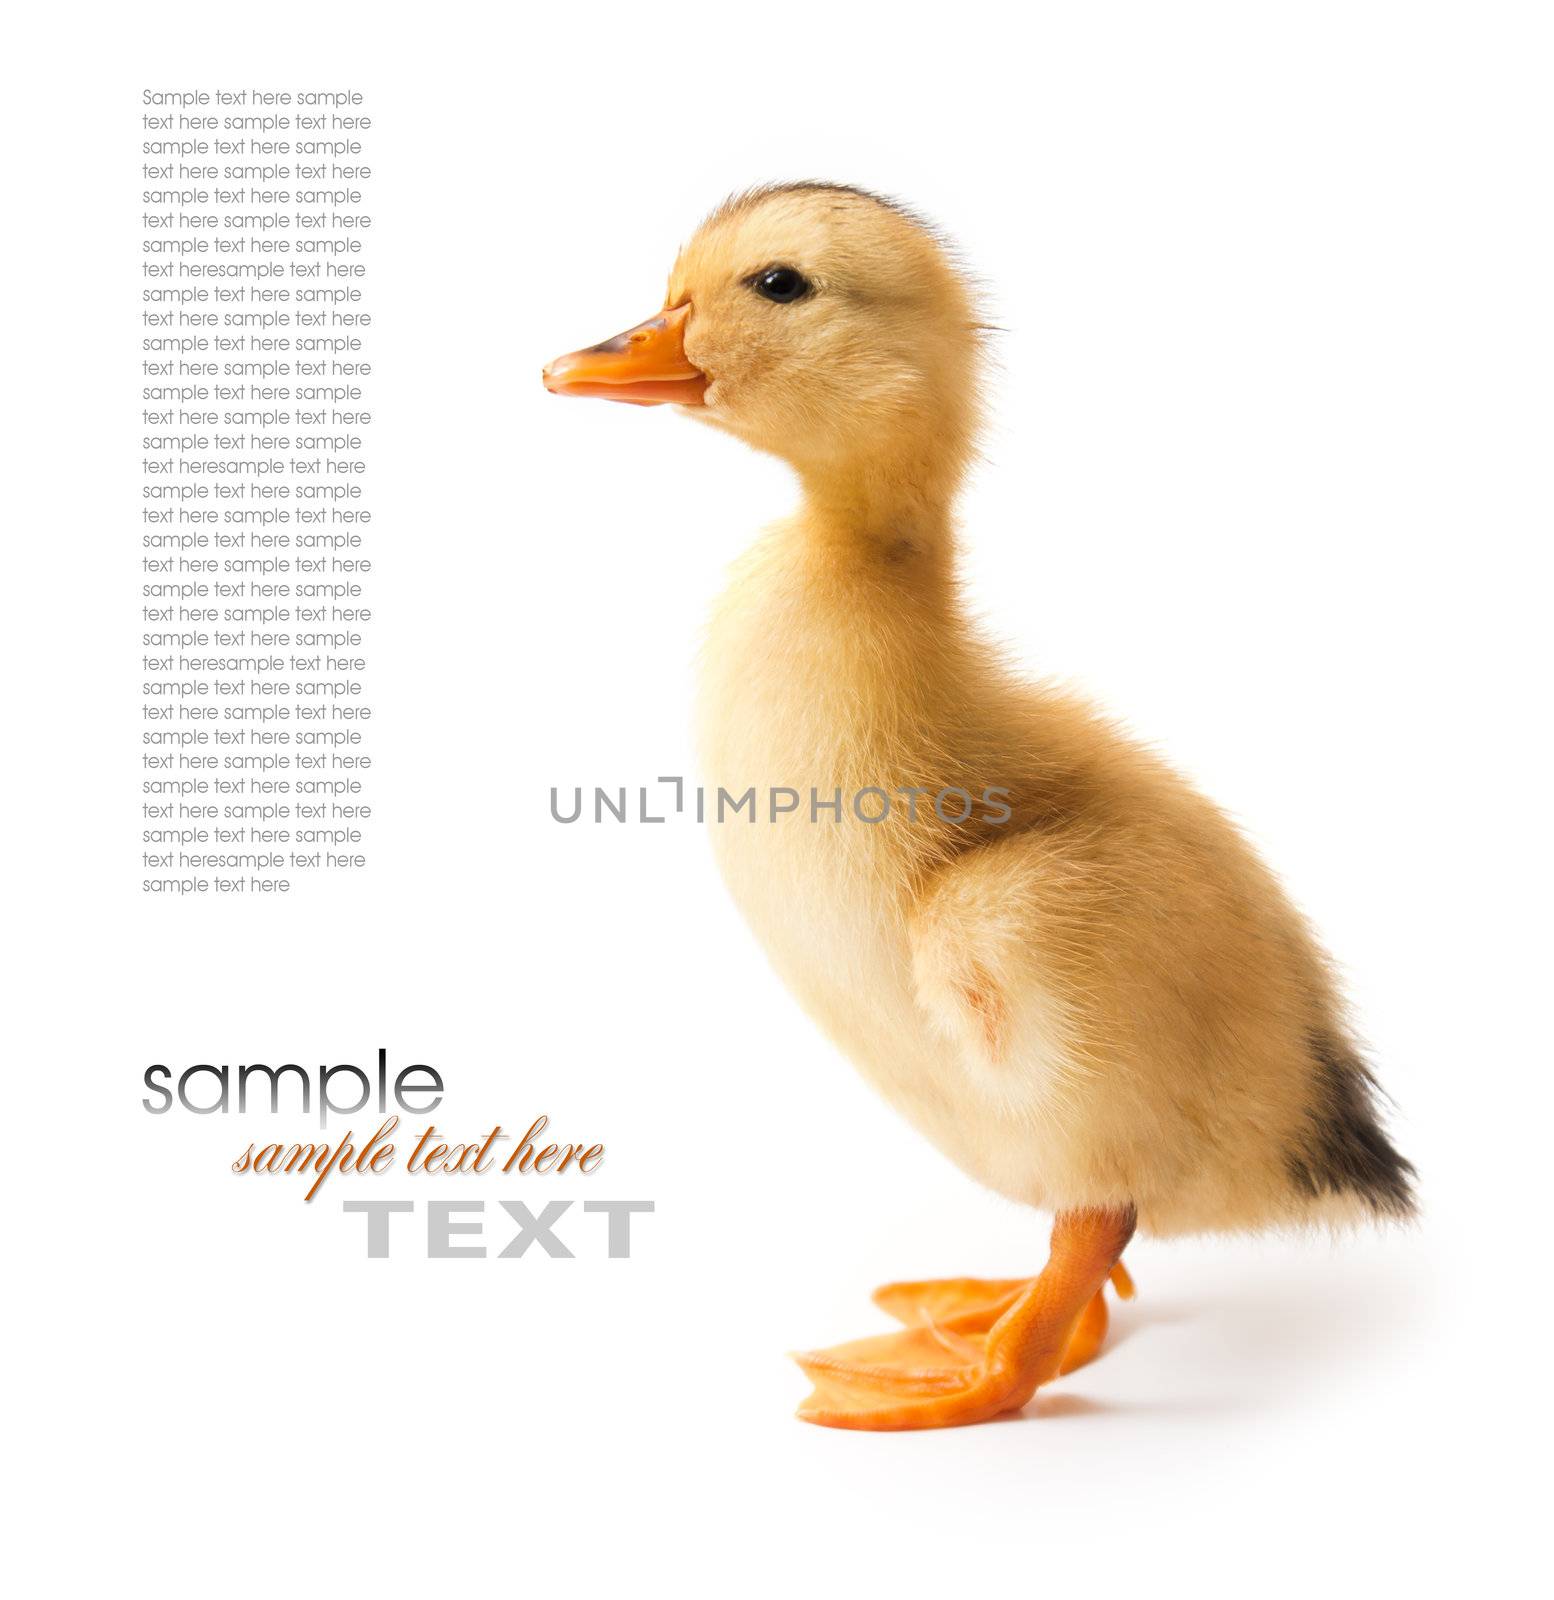 Duck is isolated on a white background